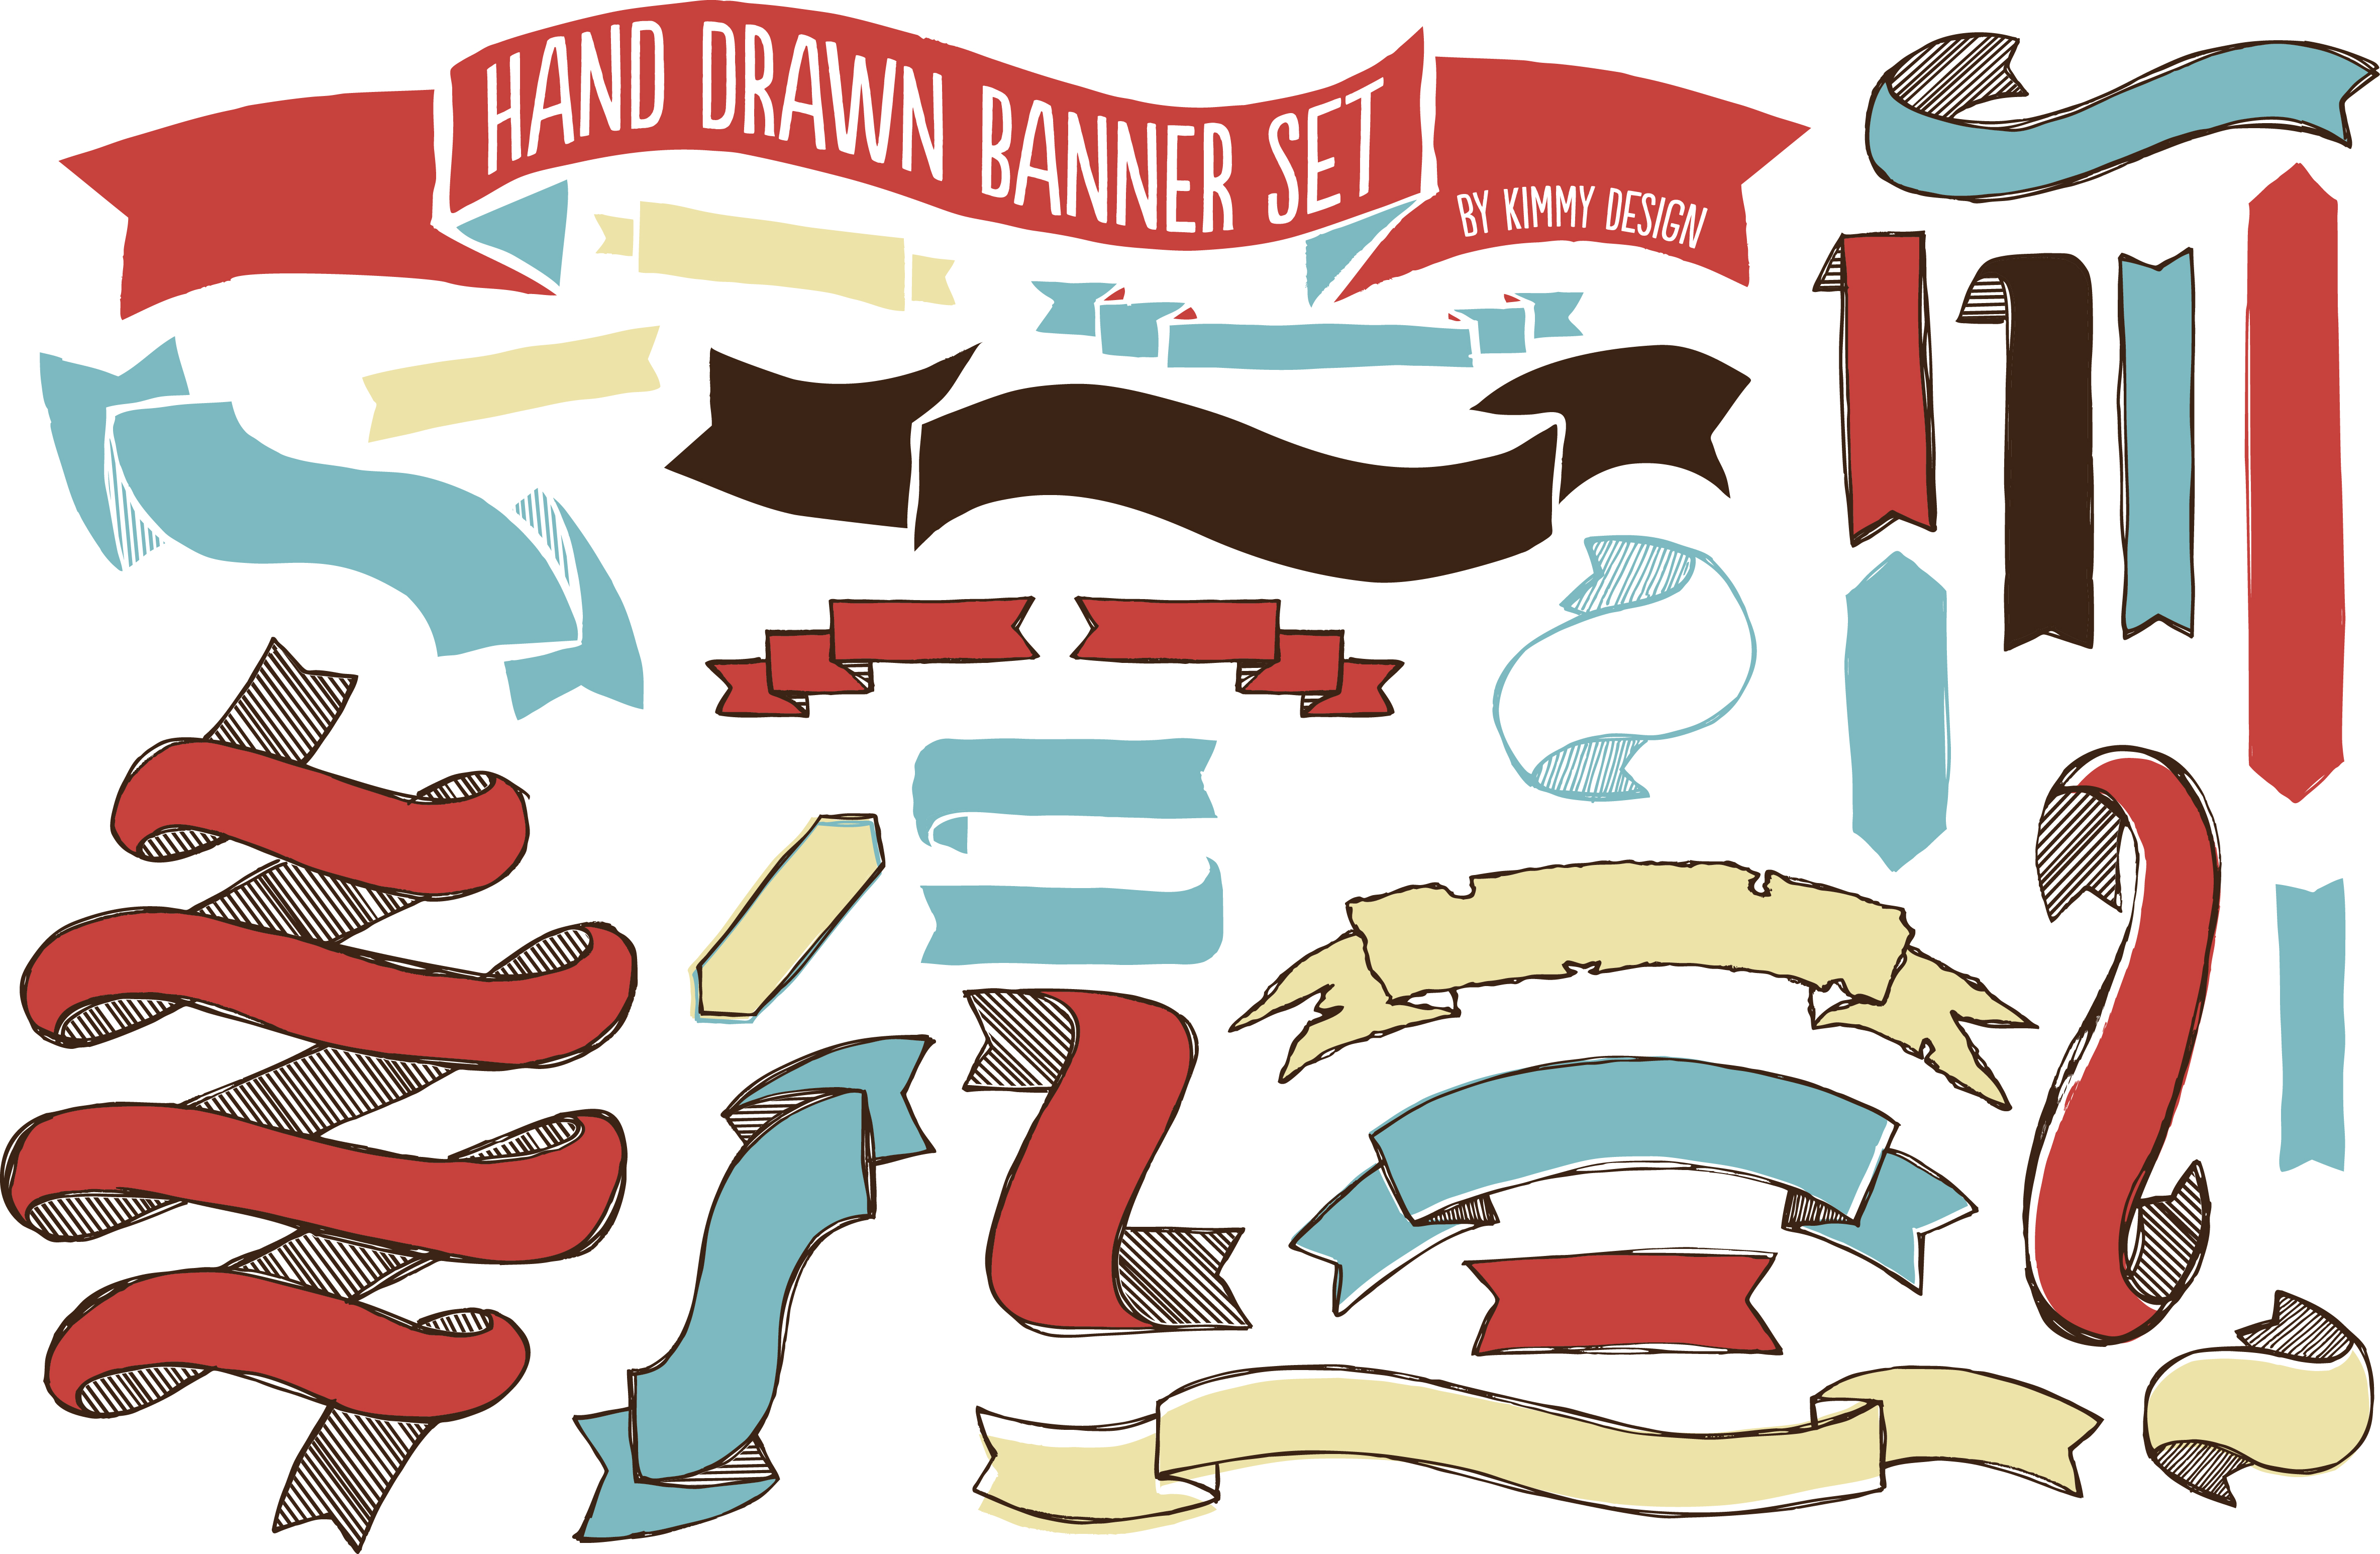 Hand Drawn Banner Set ~ Objects on Creative Market